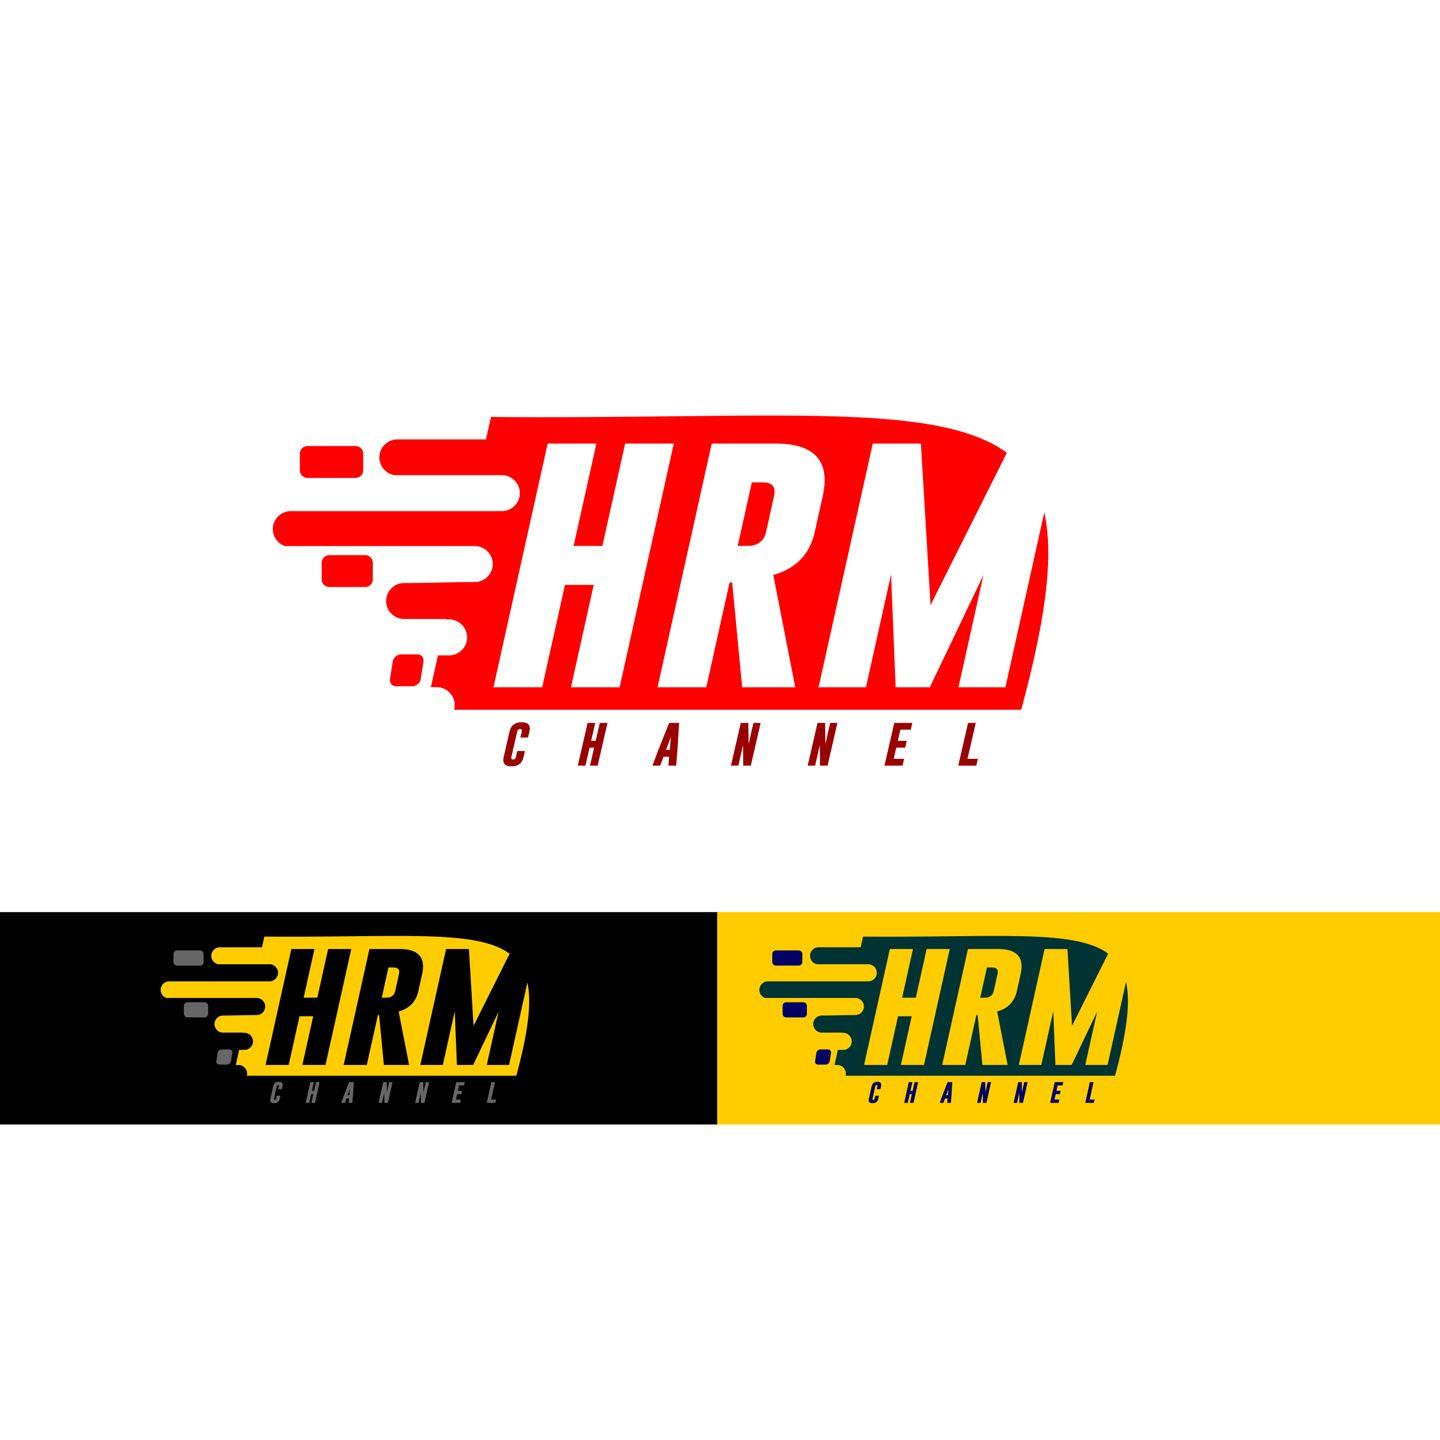 HRM Logo - Bold, Serious, Consulting Logo Design for HRM Channel by ...